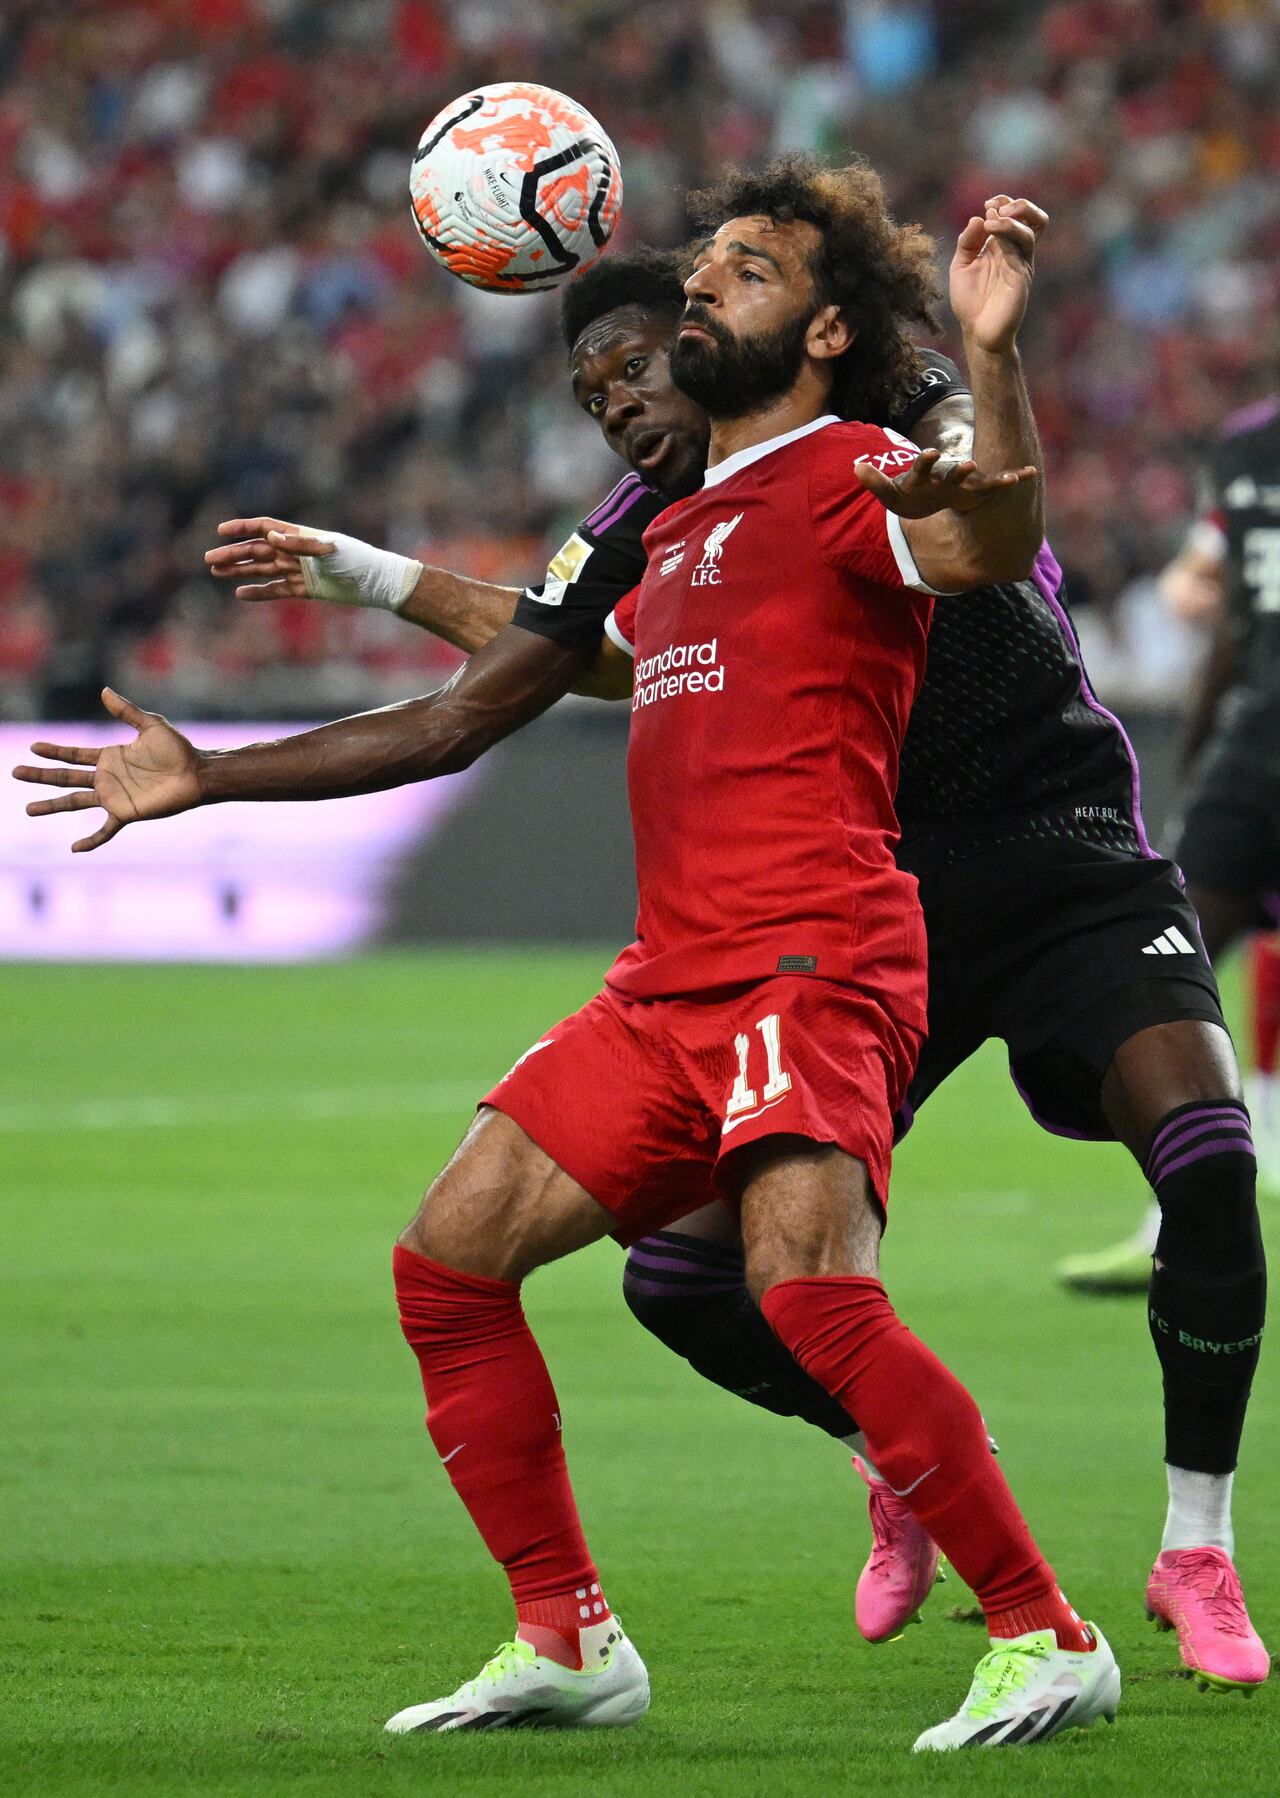 Liverpool's Egyptian striker Mohamed Salah (front) fights for the ball against Bayern Munich's Canadian midfielder Alphonso Davies during the Singapore Festival of Football pre-season friendly match in Singapore on August 2, 2023. (Photo by MOHD RASFAN / AFP)